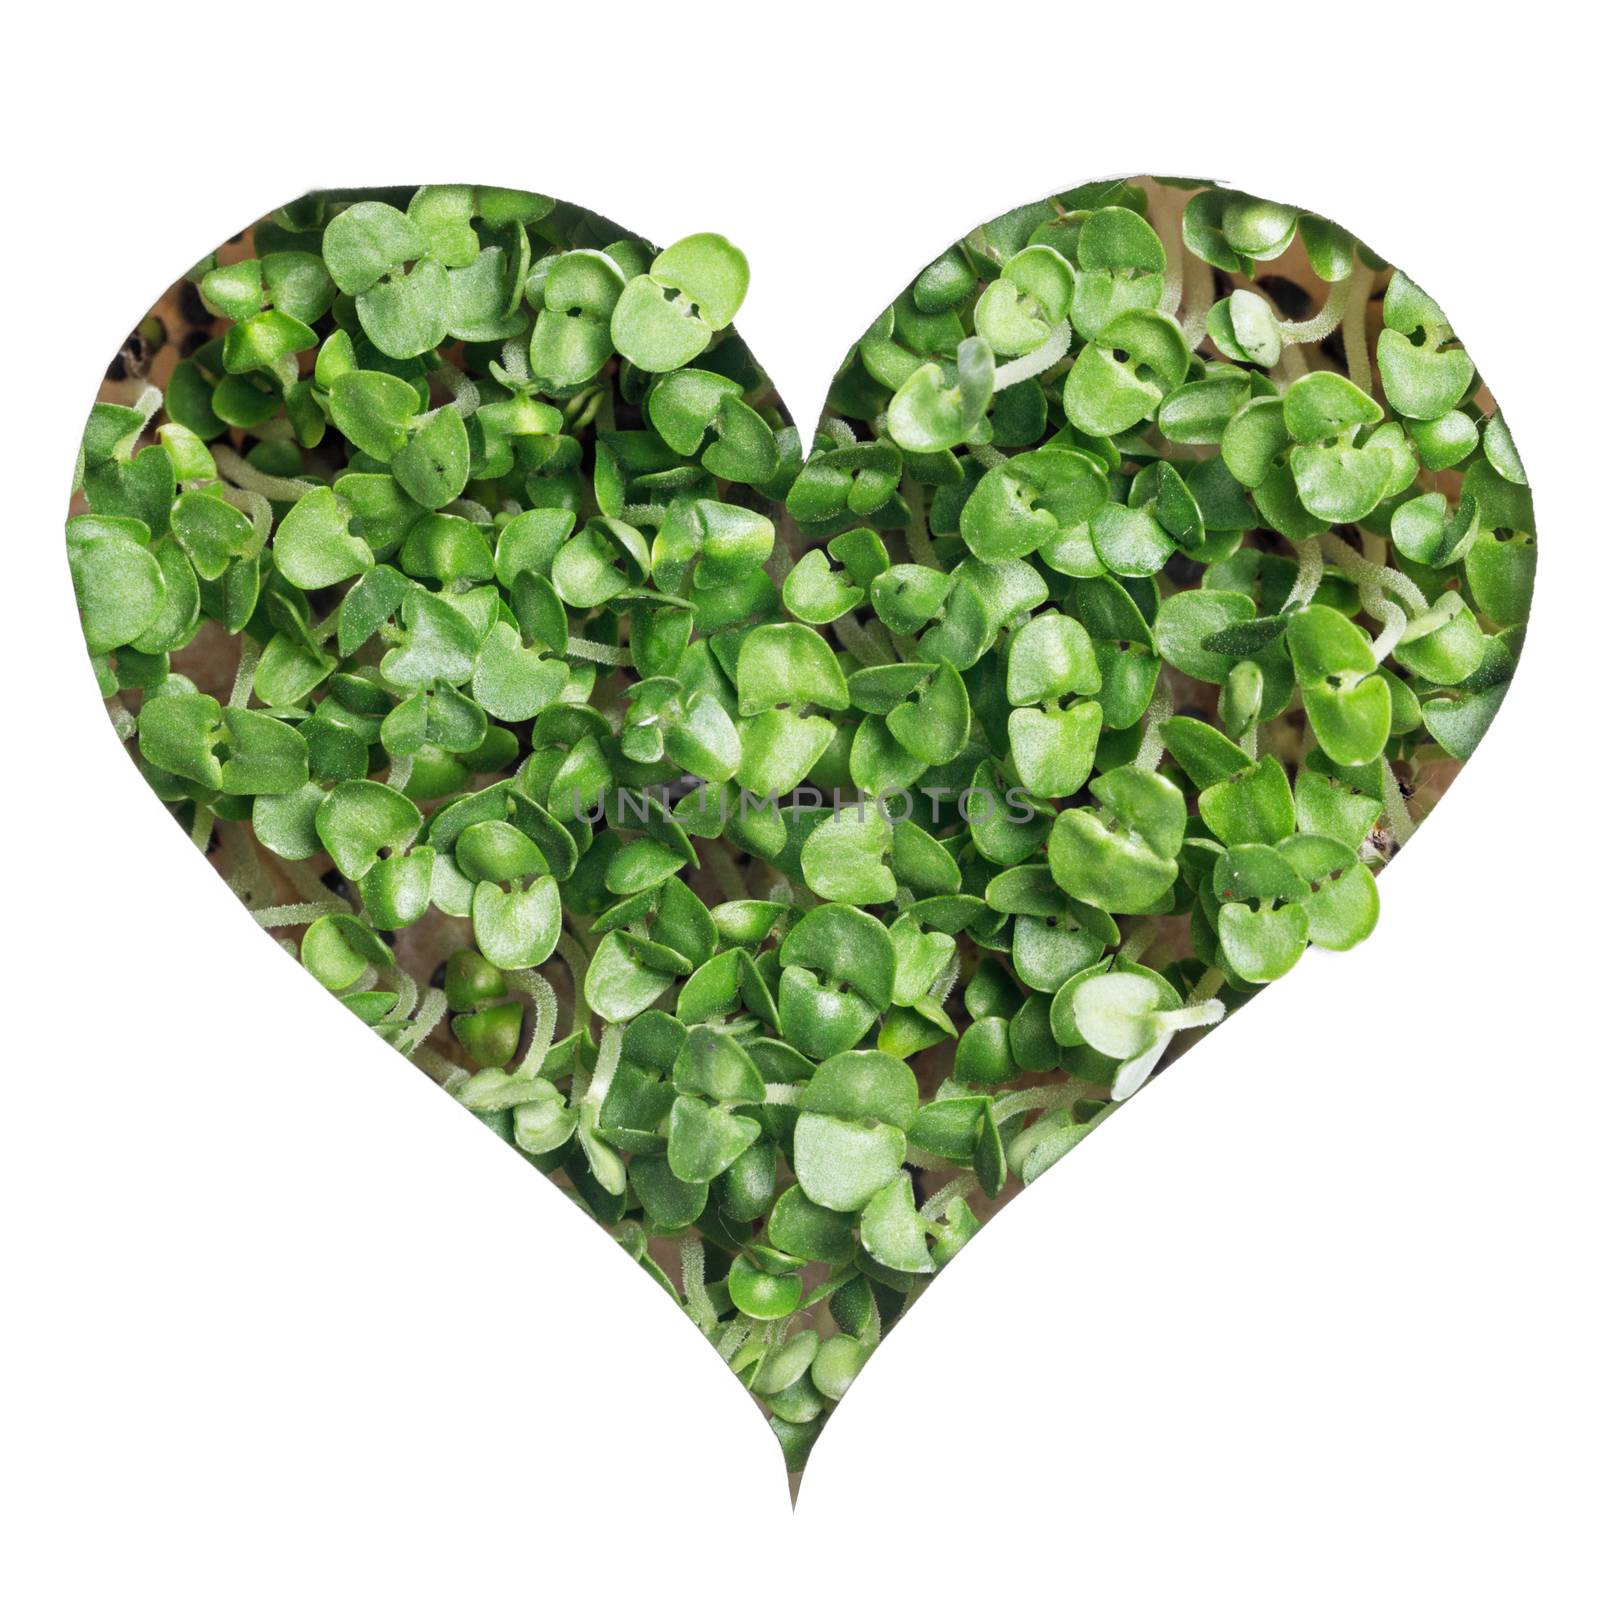 Sprout green plants a heart shape by Yellowj